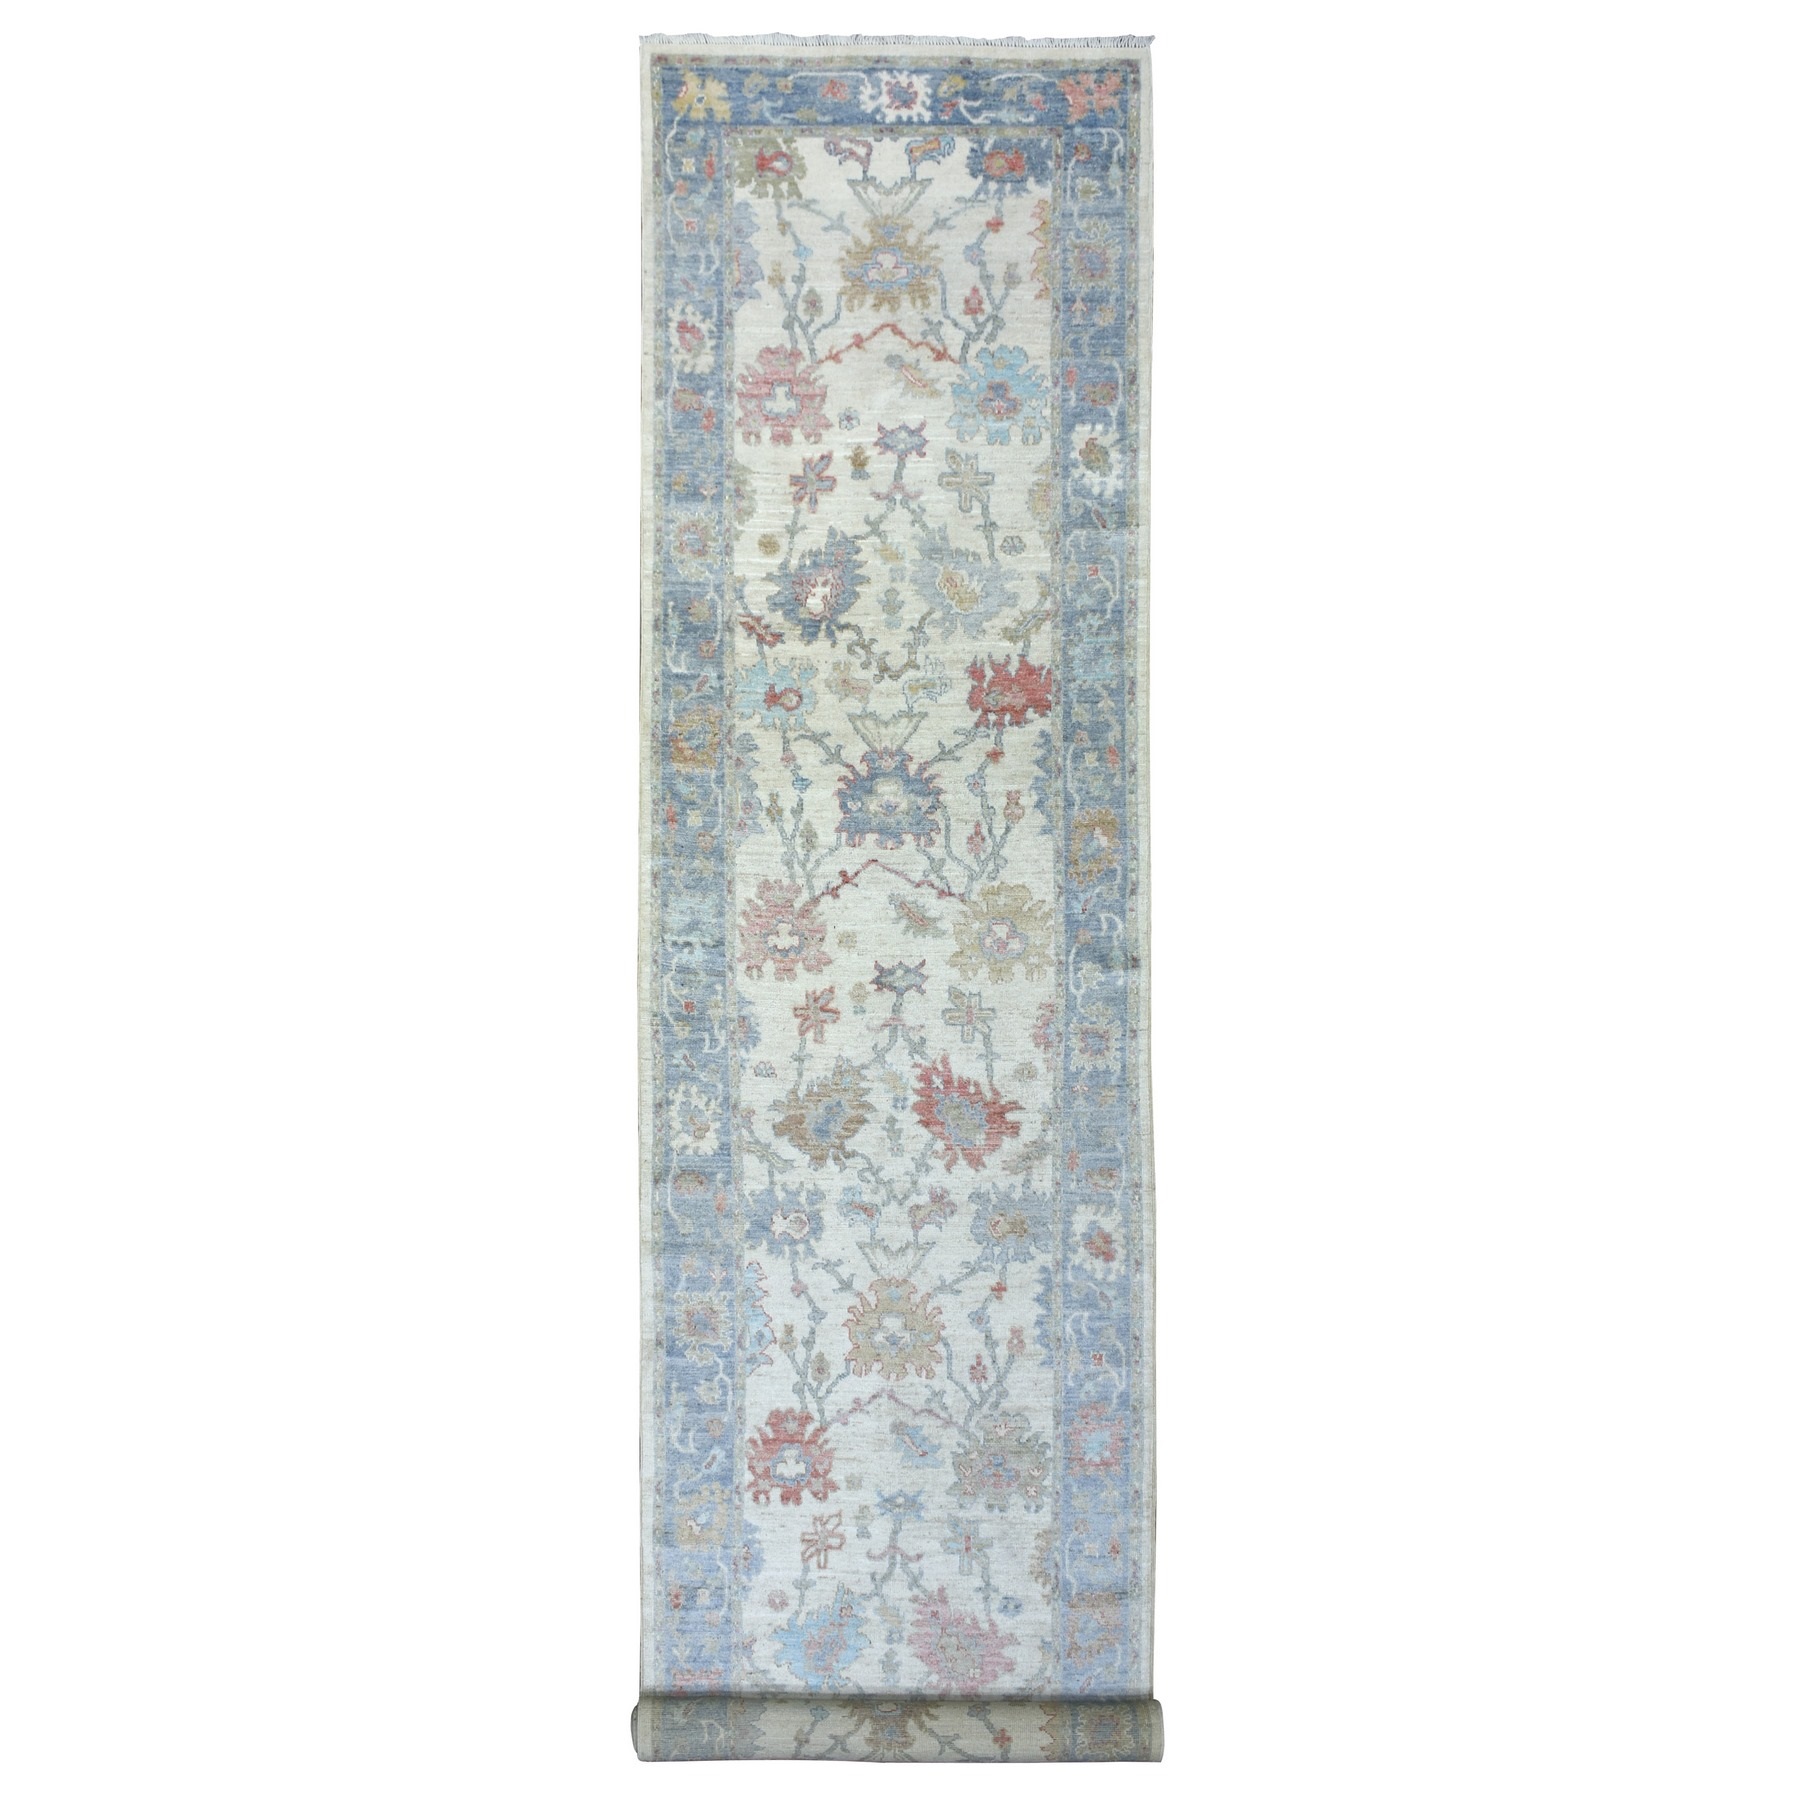 3'10"x19'4" Ivory Angora Oushak With Colorful Leaf Design Natural Dyes, Afghan Wool Hand Woven Runner Oriental Rug 